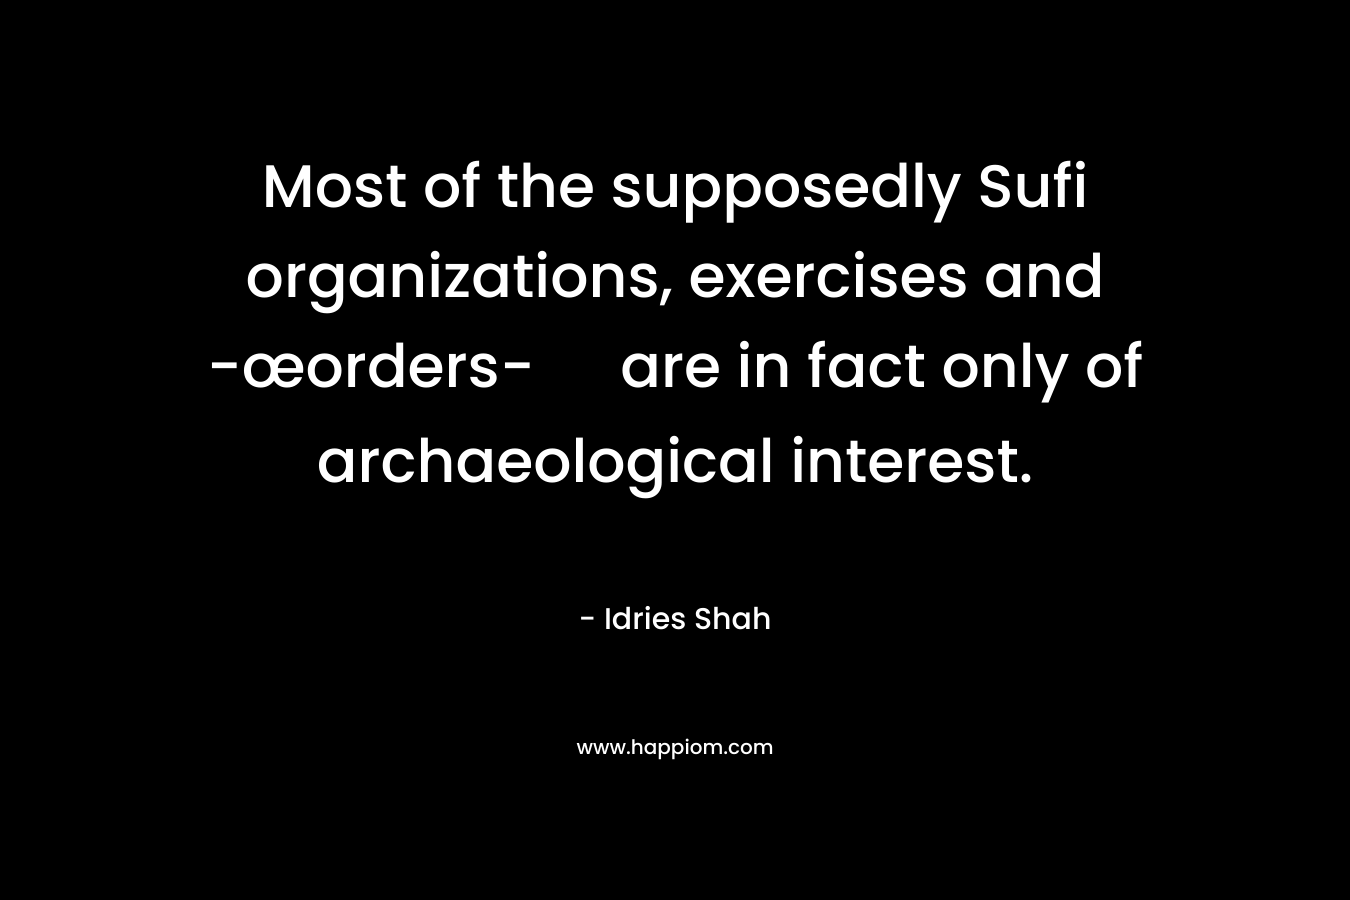 Most of the supposedly Sufi organizations, exercises and -œorders- are in fact only of archaeological interest. – Idries Shah